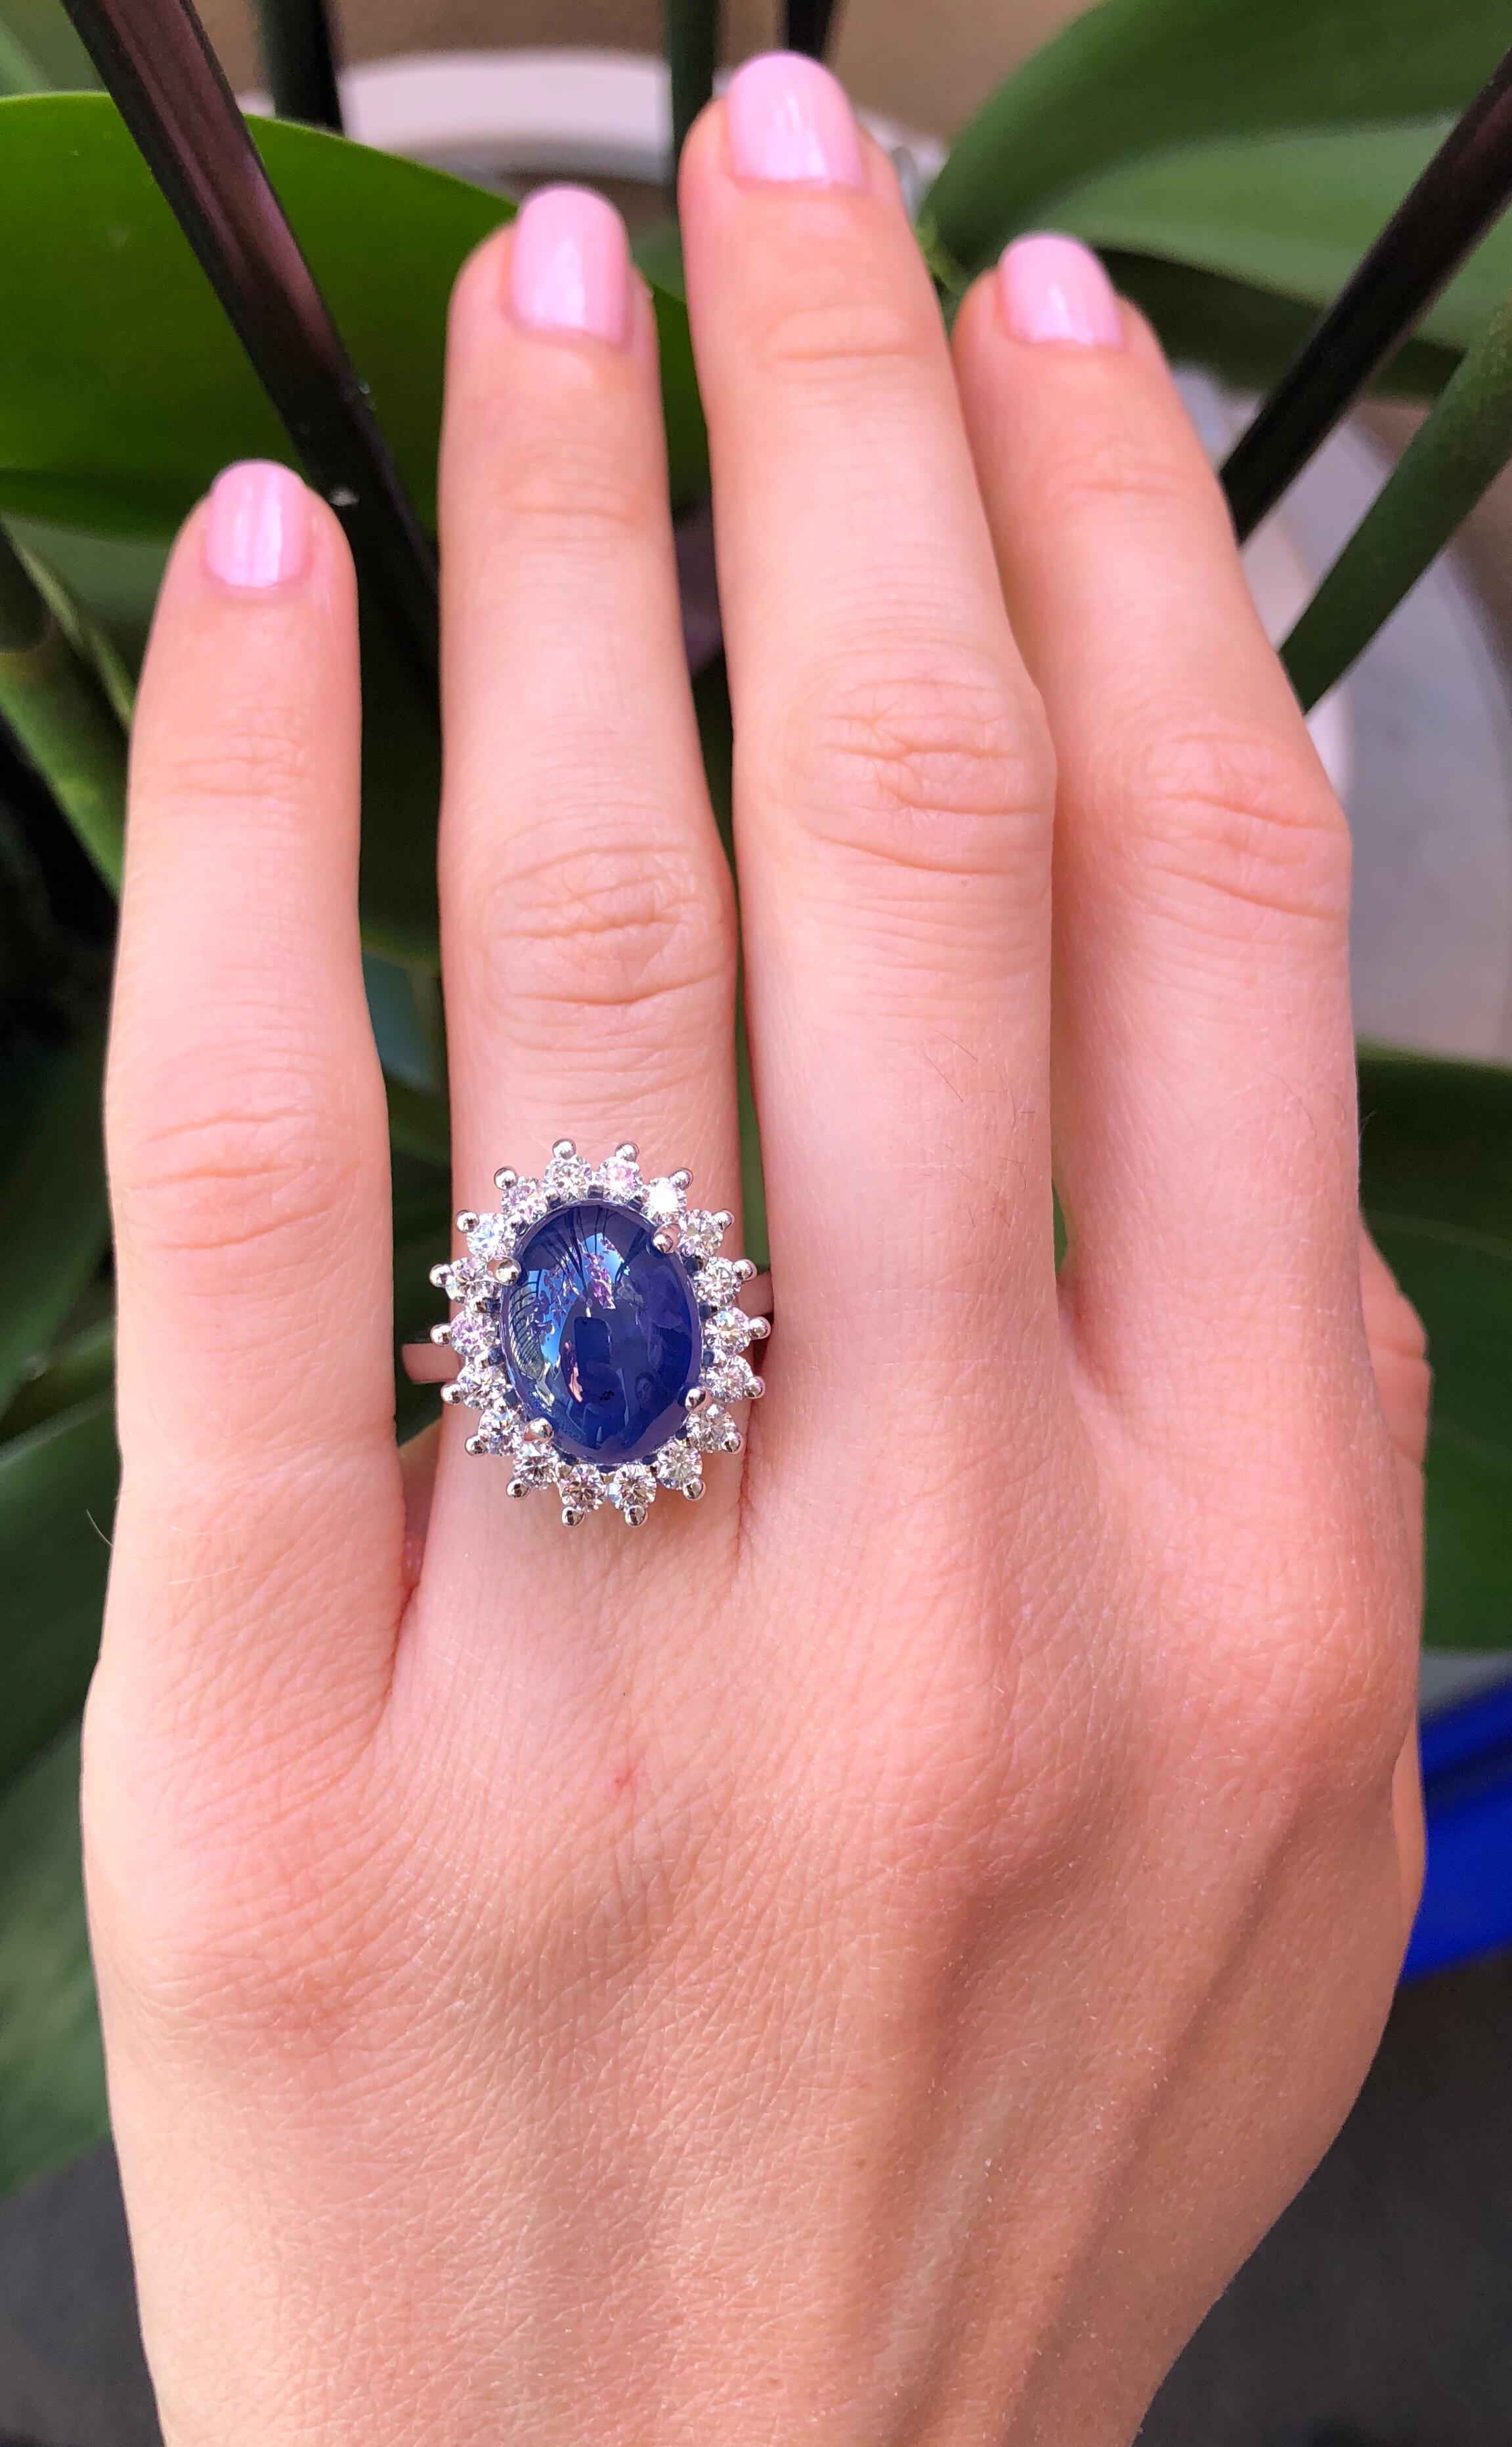 Oval Cut Sapphire Ring Cabochon 8.97 Carats